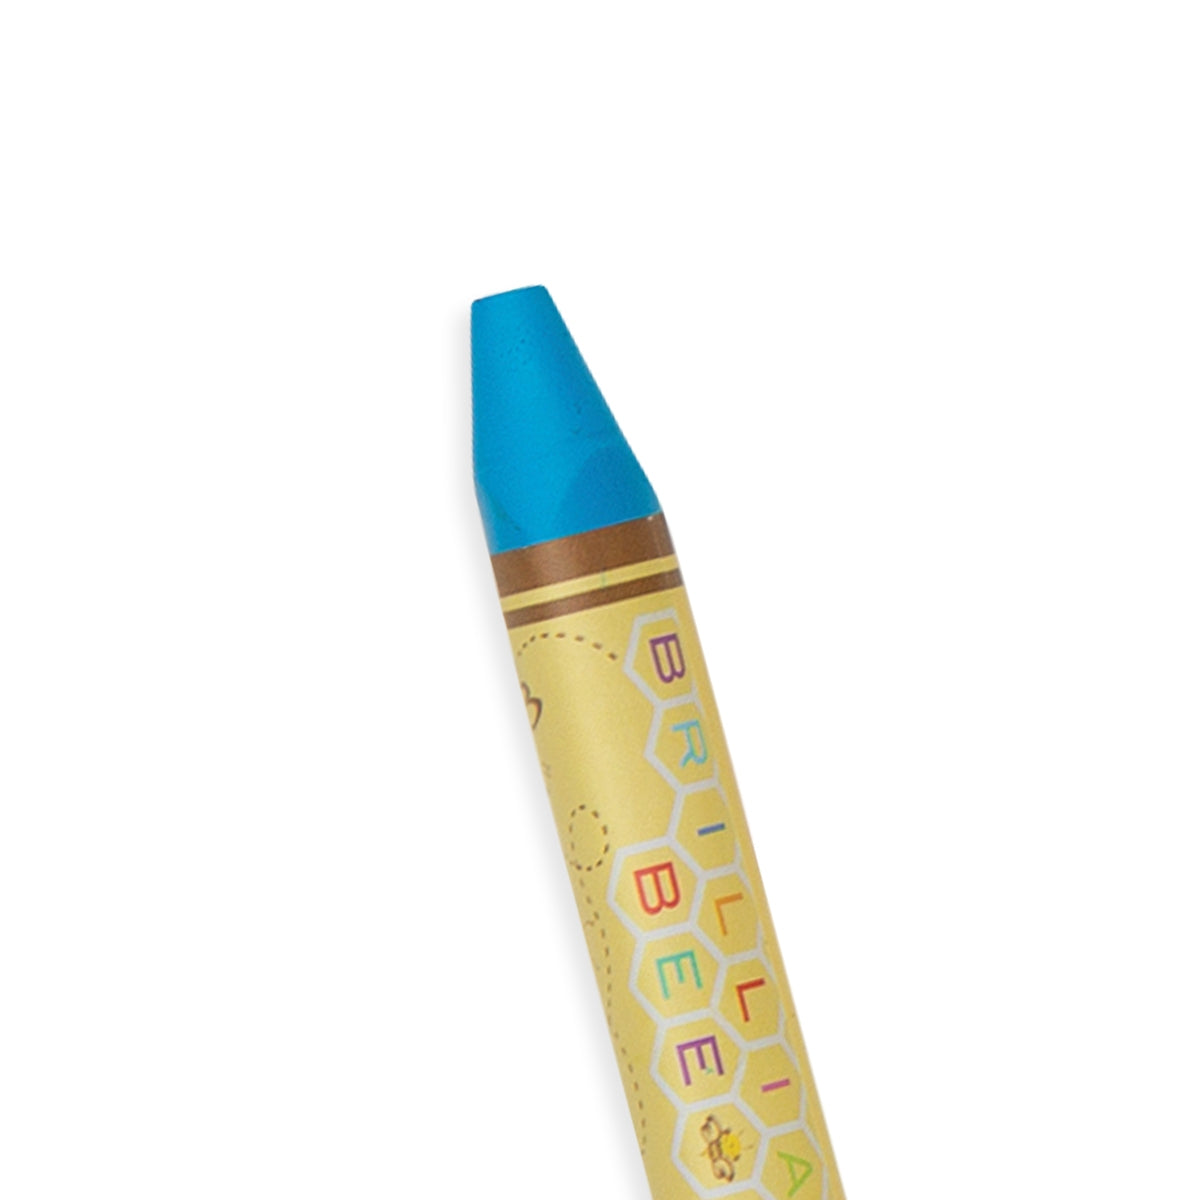 BRILLIANT BEE CRAYONS - 12 PACK